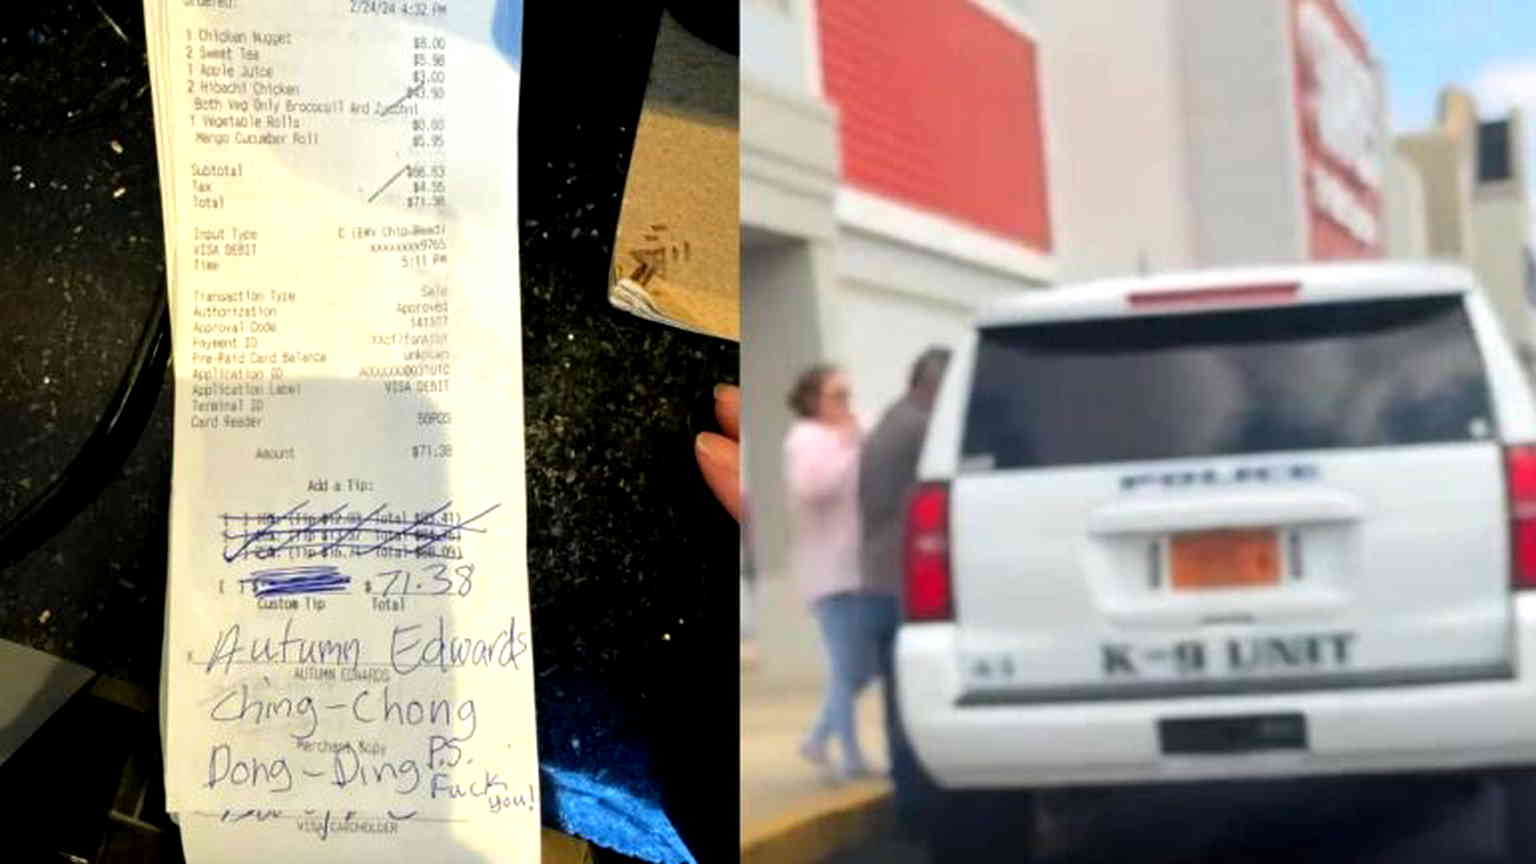 Racist note left on receipt at Asian restaurant in North Carolina sparks outrage